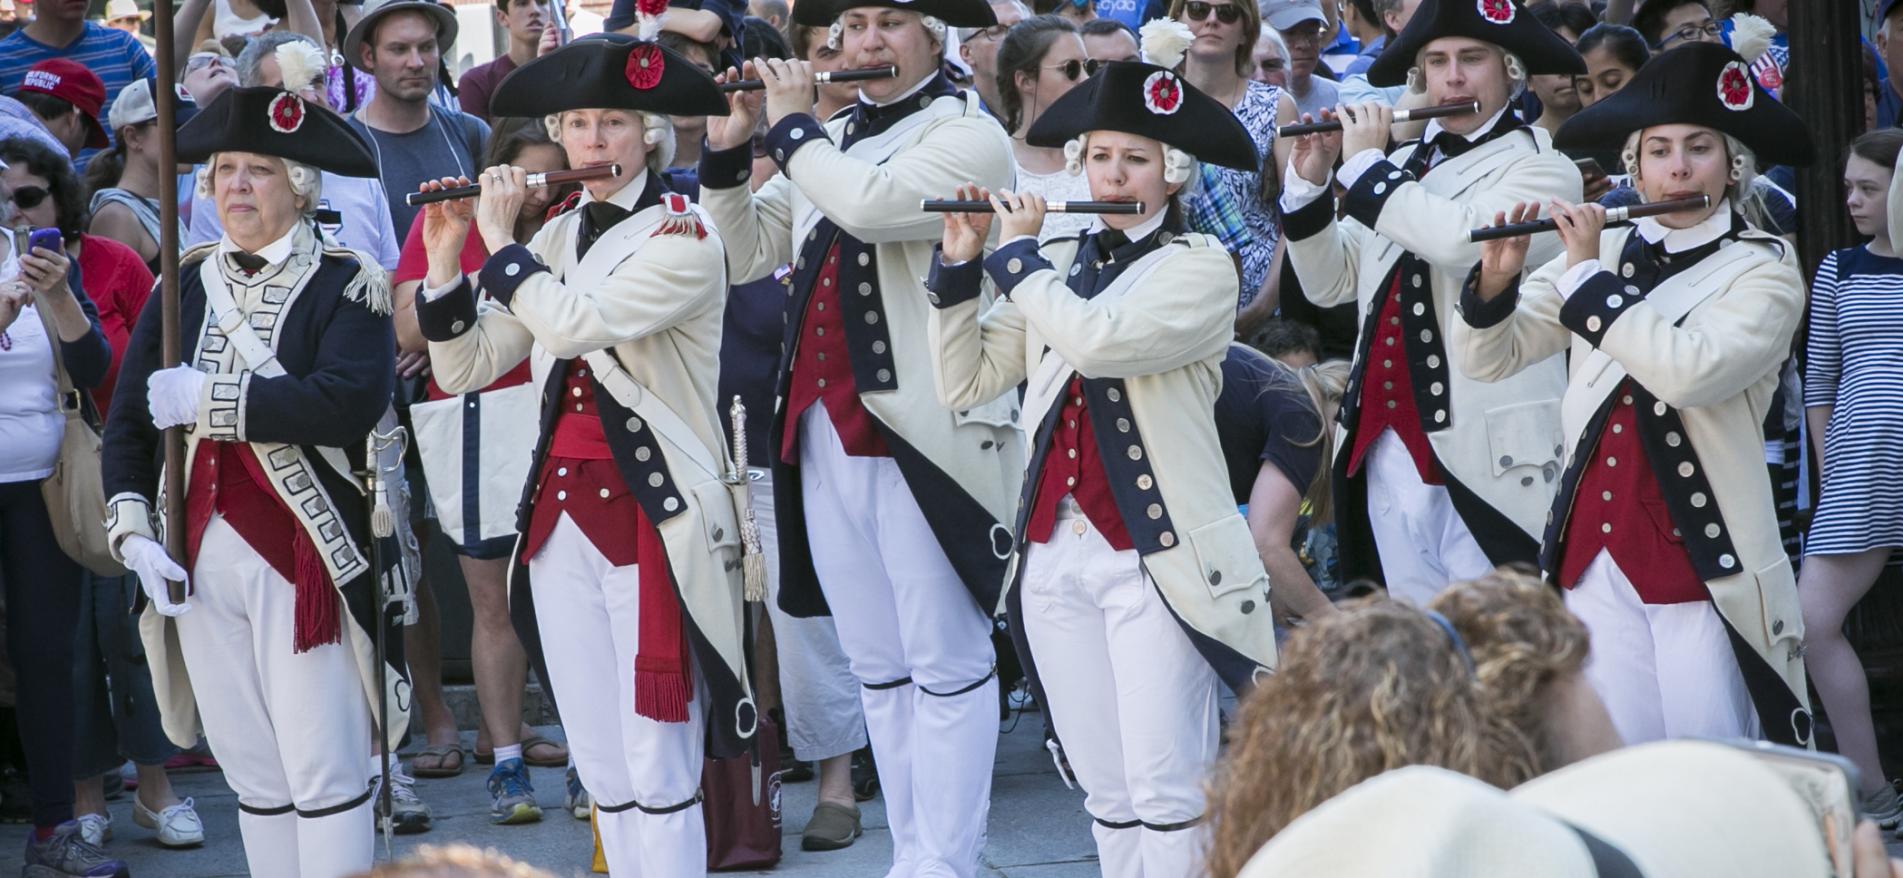 4th of July, 2020 in Boston History, Performances & Fireworks